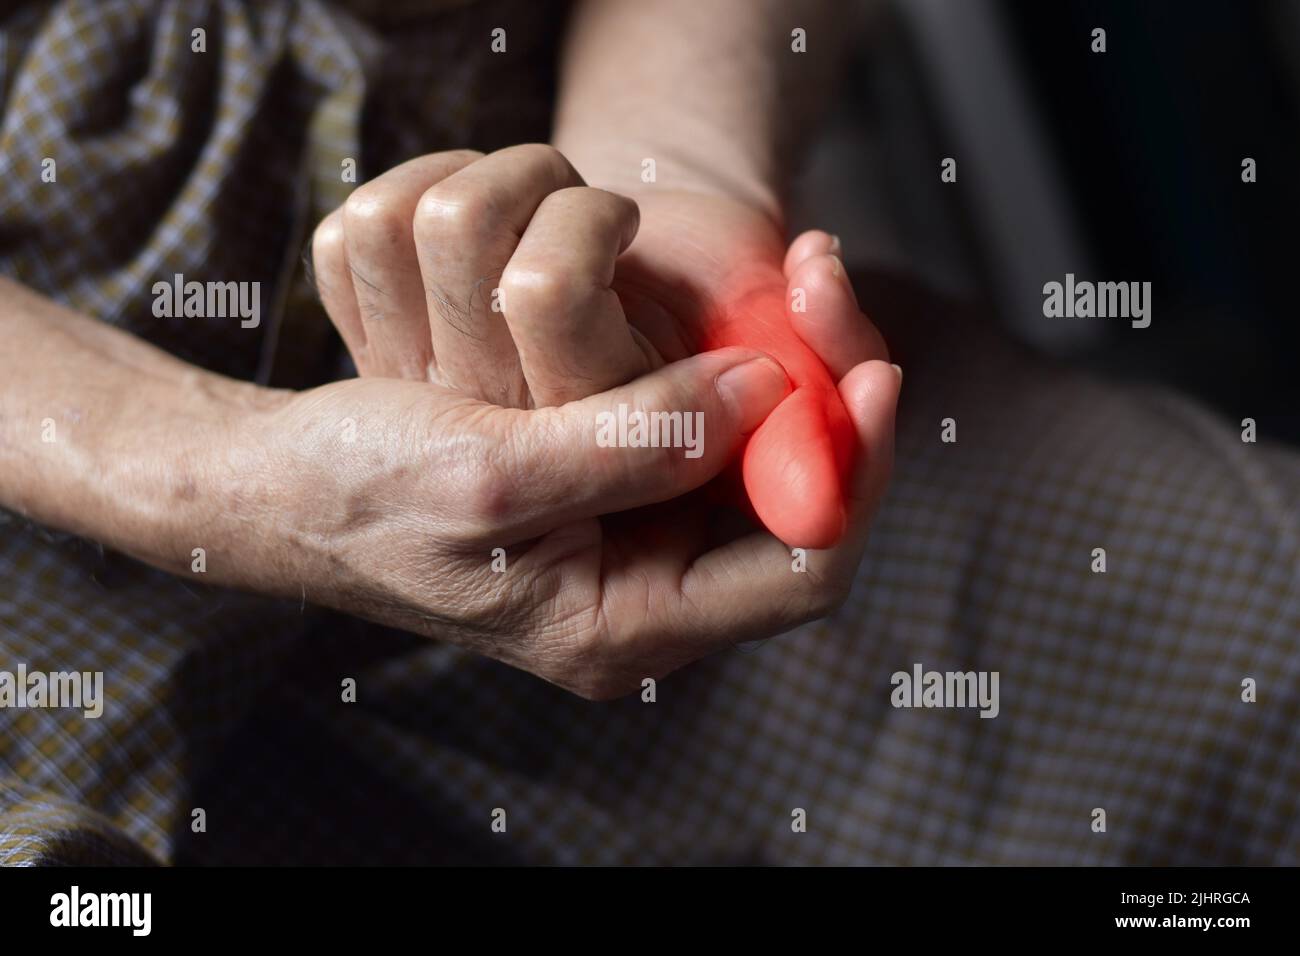 Inflammation of Asian old man thumb. Concept of painful digit, cellulitis or finger problems. Stock Photo